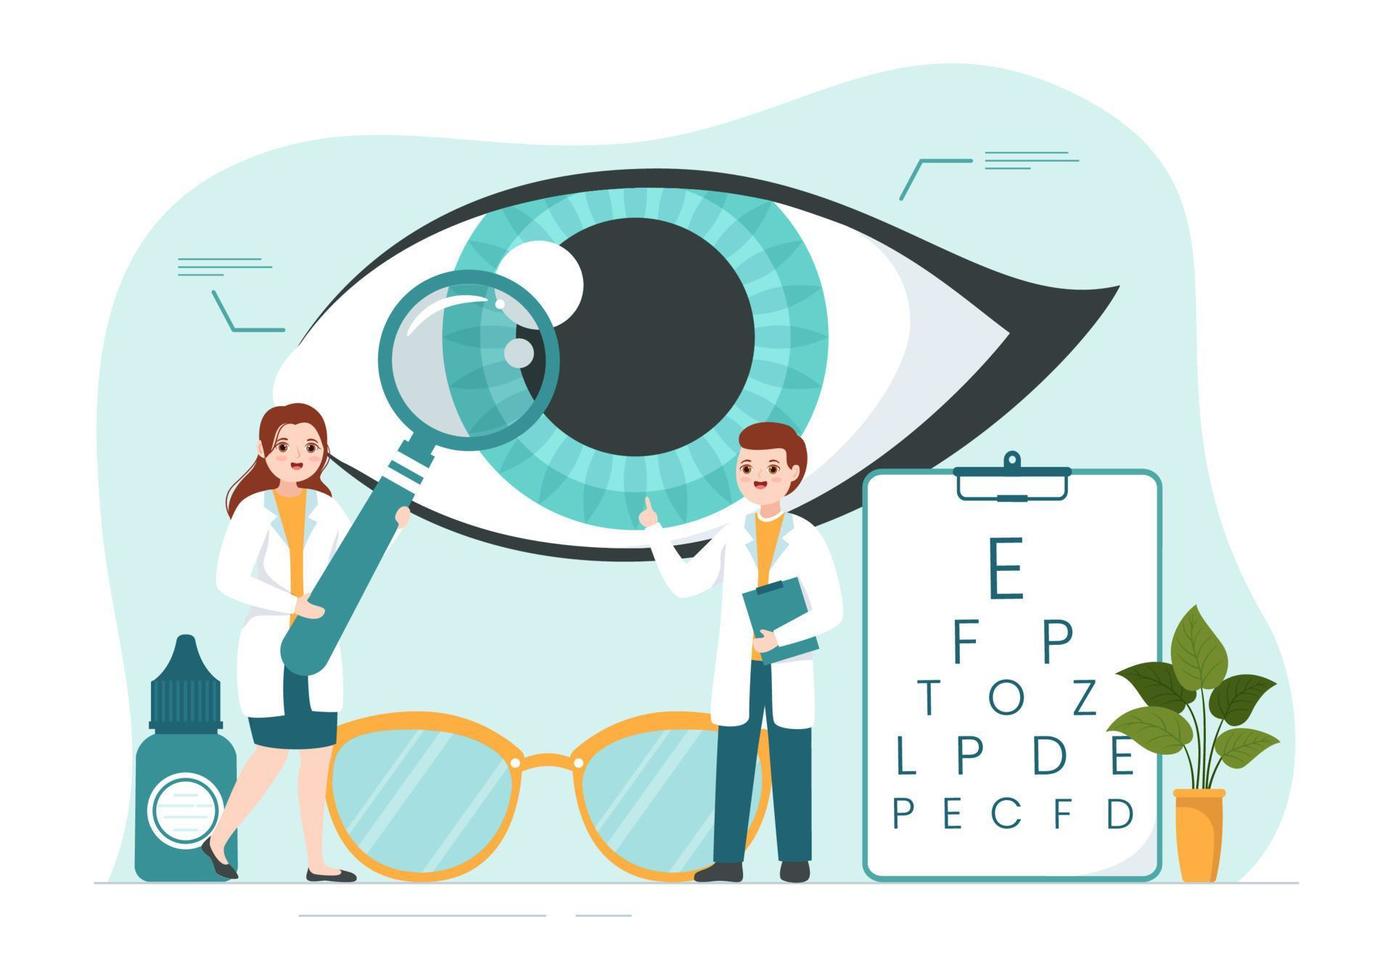 Optometrist with Ophthalmologist Checks Patient Sight, Optical Eye Test and Spectacles Technology in Flat Cartoon Hand Drawn Templates Illustration vector